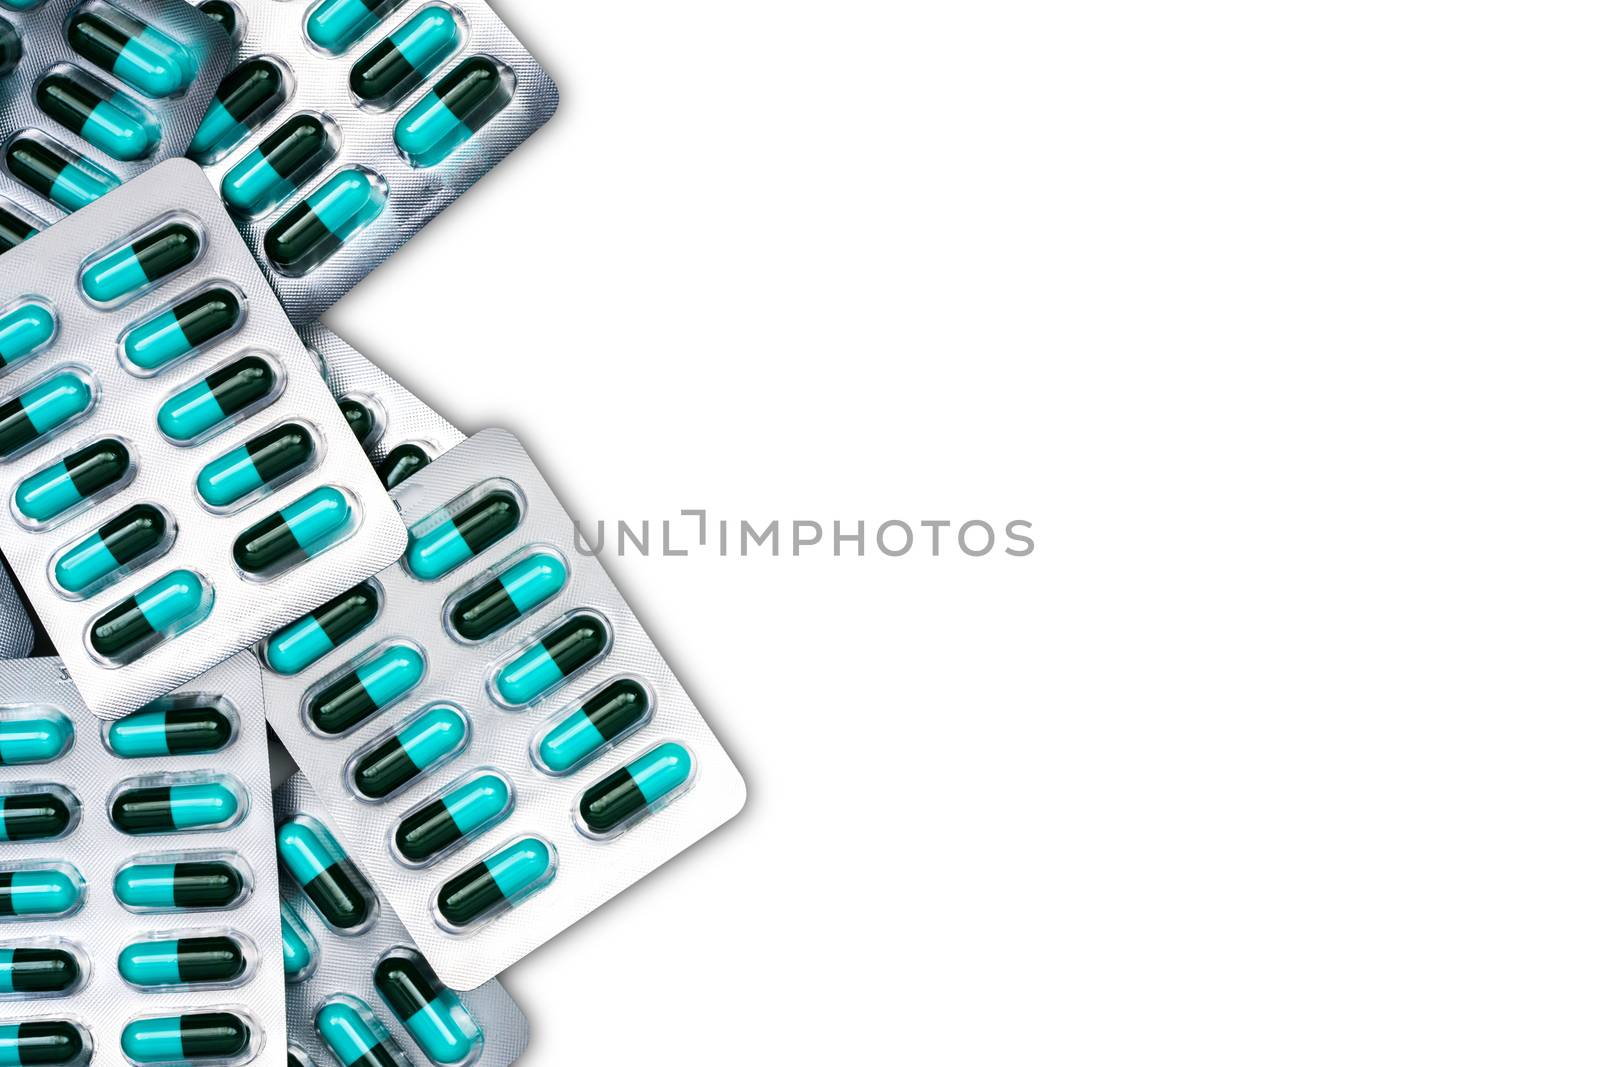 Top view of blue and green antibiotics capsule pills in blister packs isolated on white background with copy space. Antimicrobial drug resistance and antibiotics drug use with reasonable concept. Pharmaceutical industry. Pharmacy background. Global healthcare concept. by Fahroni